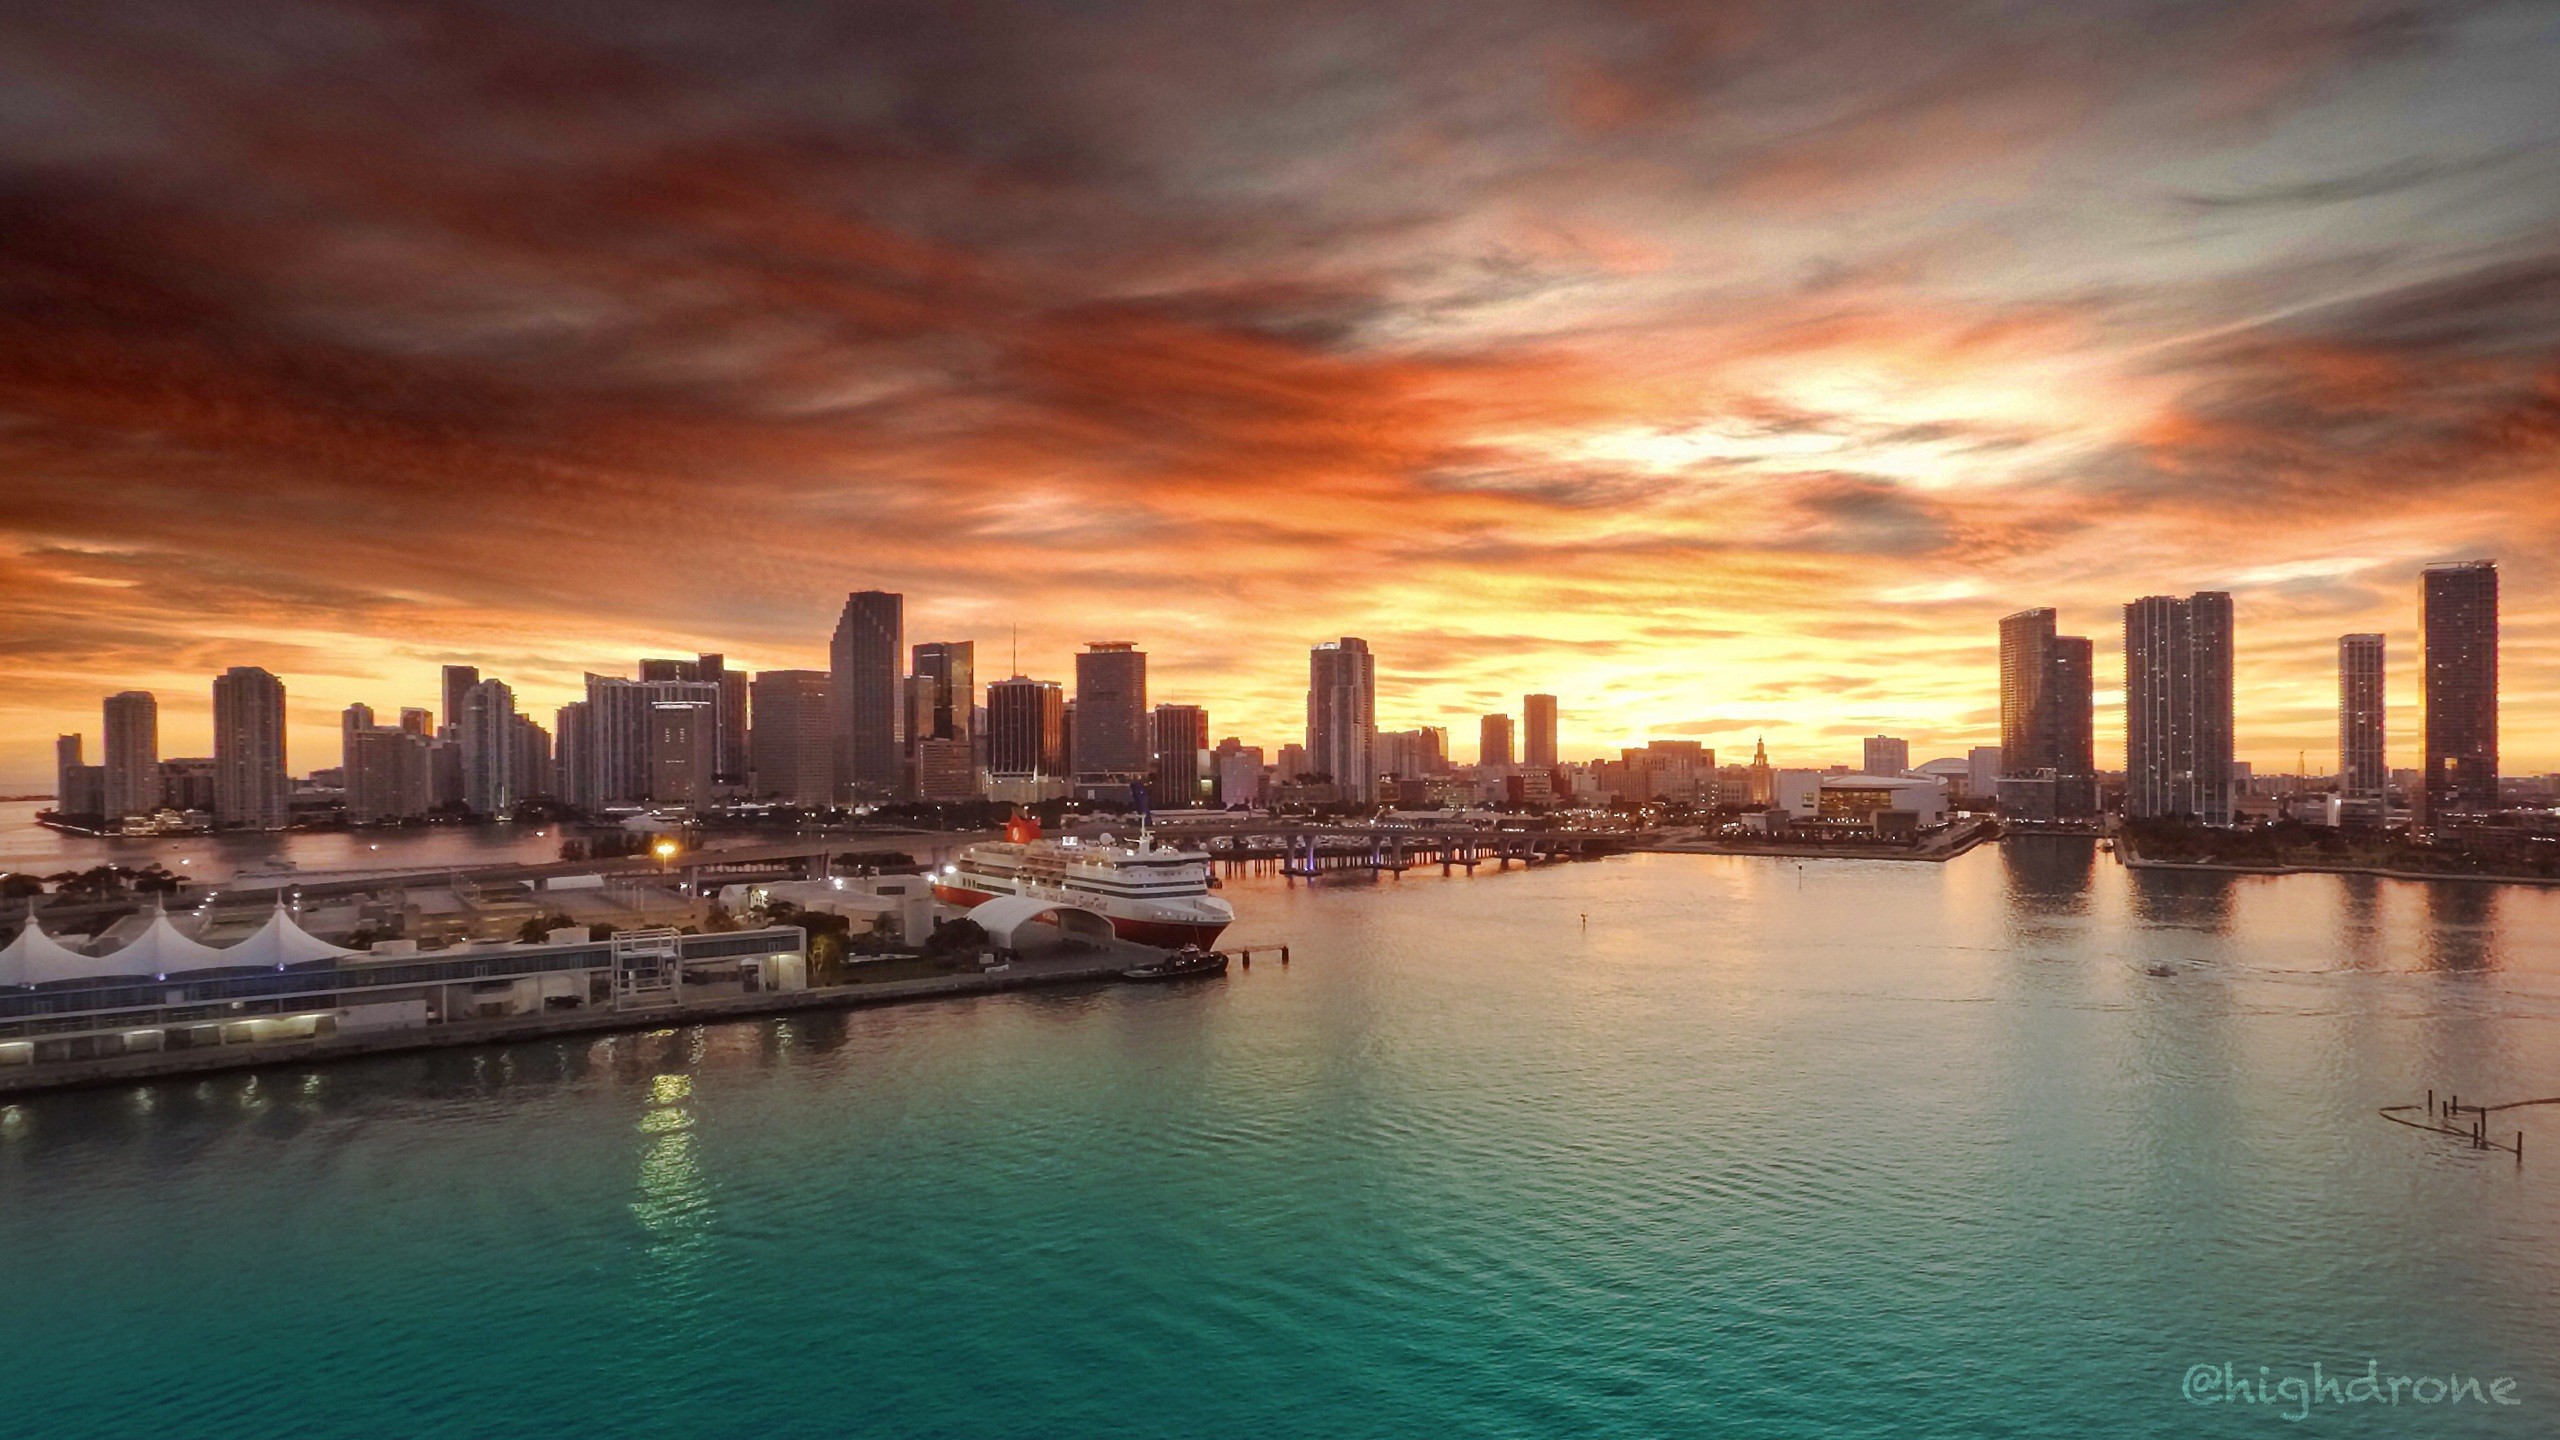 2560x1440 Downtown Miami Sunset w/ a Drone IG @highdrone